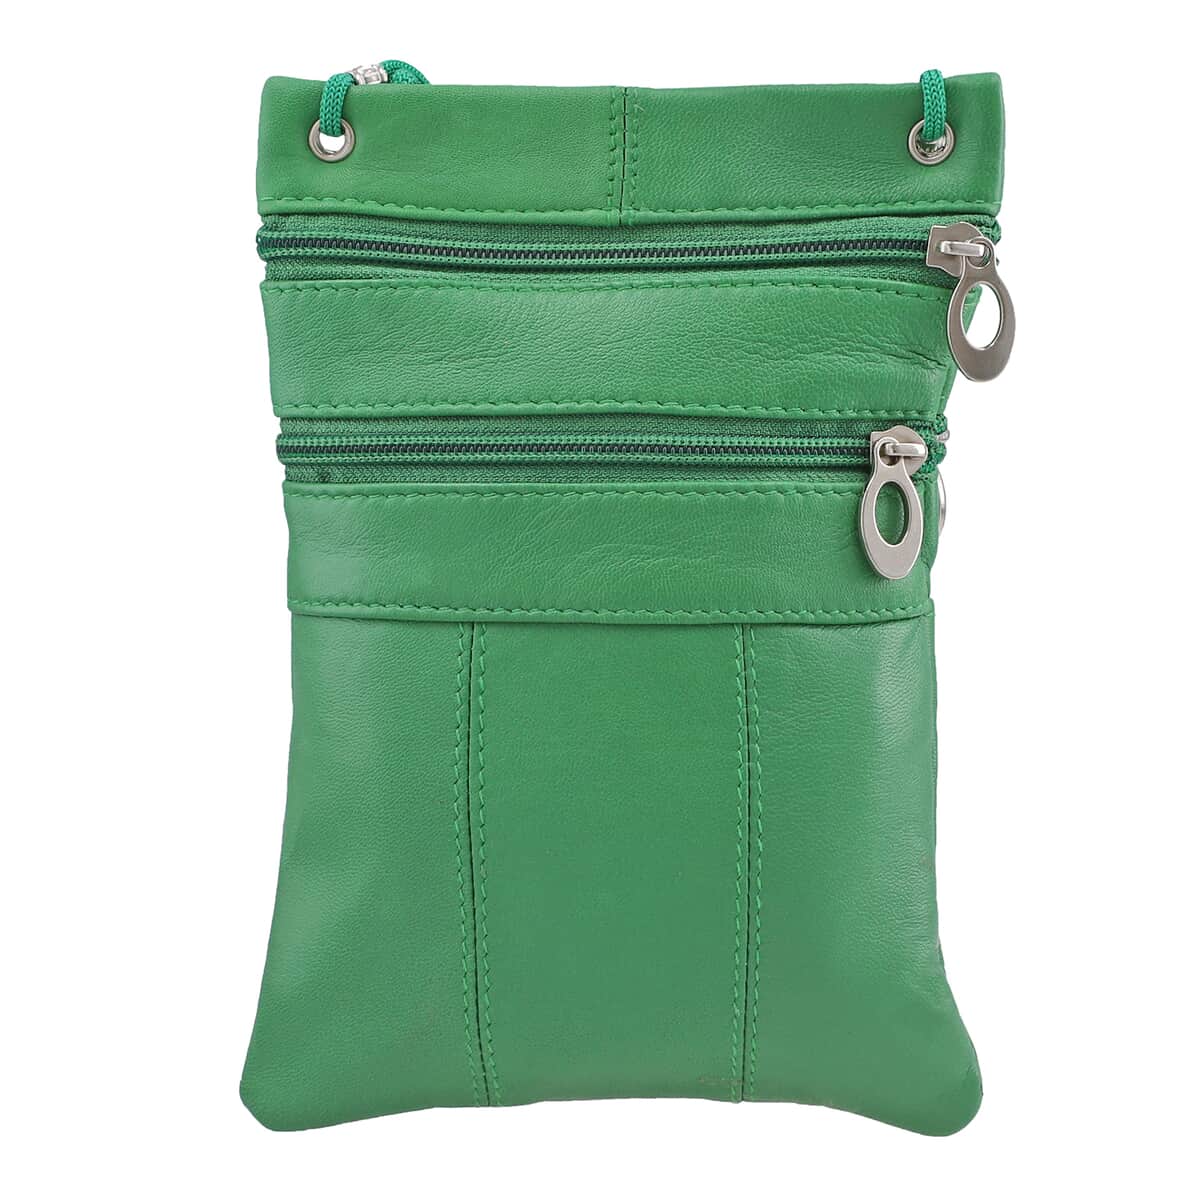 NEWAGE Green 100% Genuine Leather Crossbody Bag with Man-made Strap image number 3